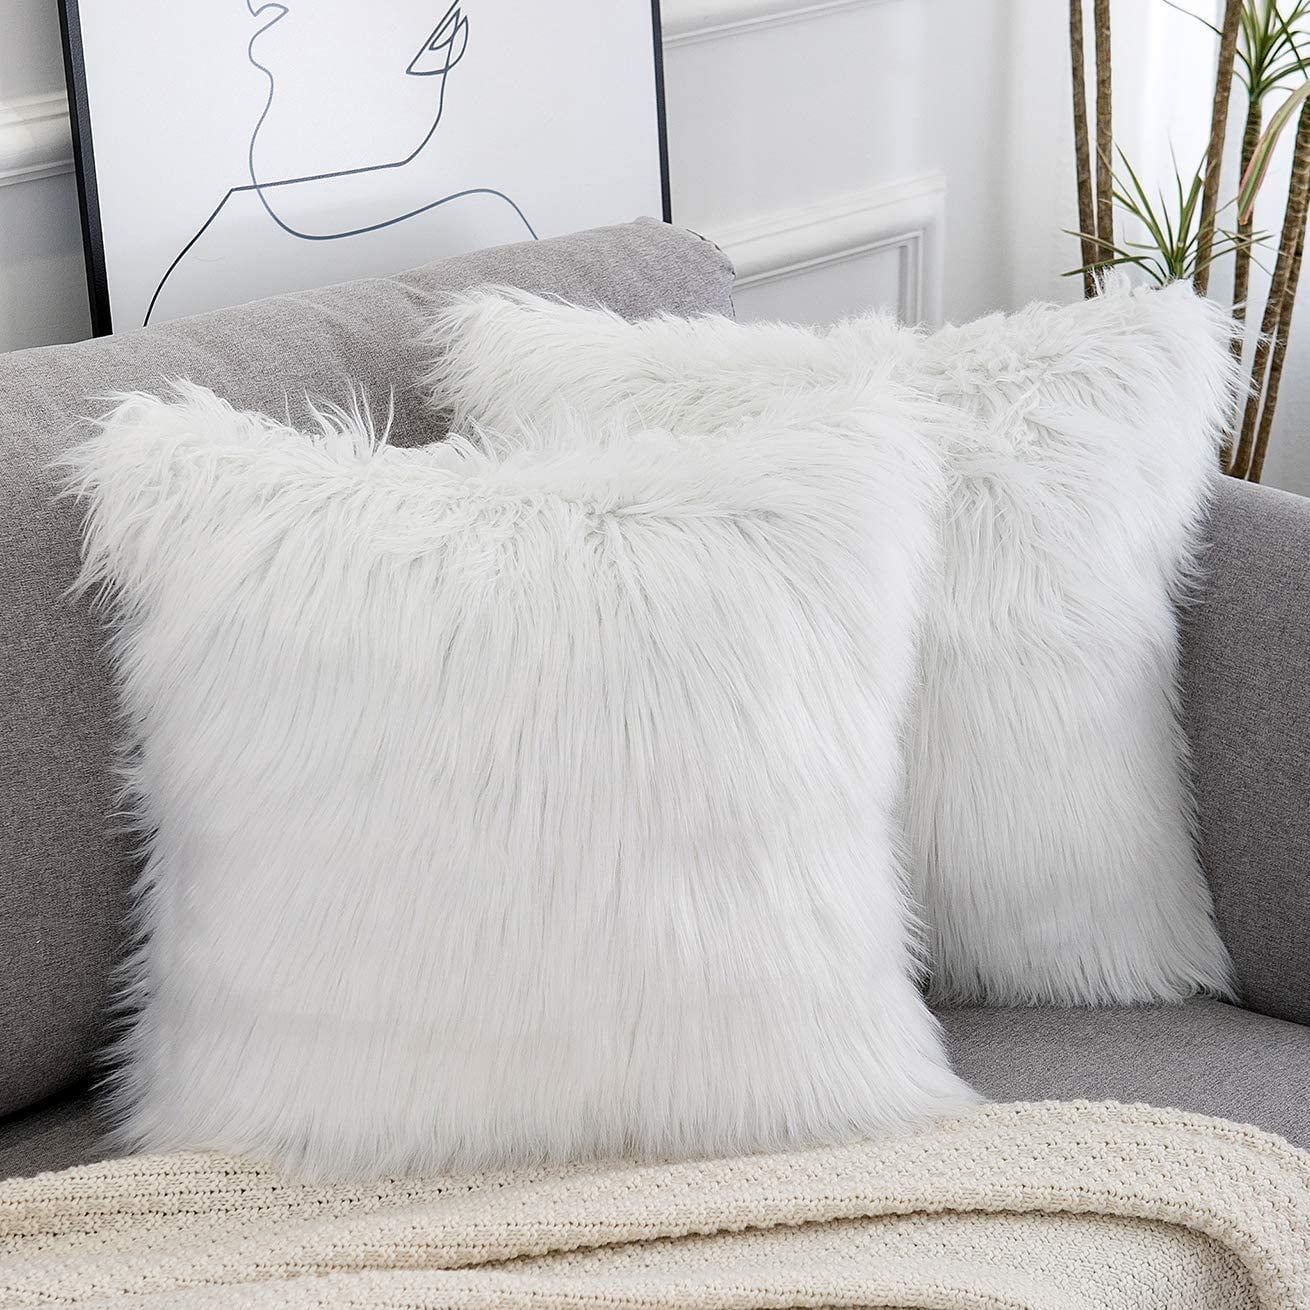 Snuggle Sac Luxury Faux Fur Throw Pillow Covers 18x18 Set of 2 for Fall  Decorative Super Soft Fluffy Aesthetic Marble Textured Square Cojines for